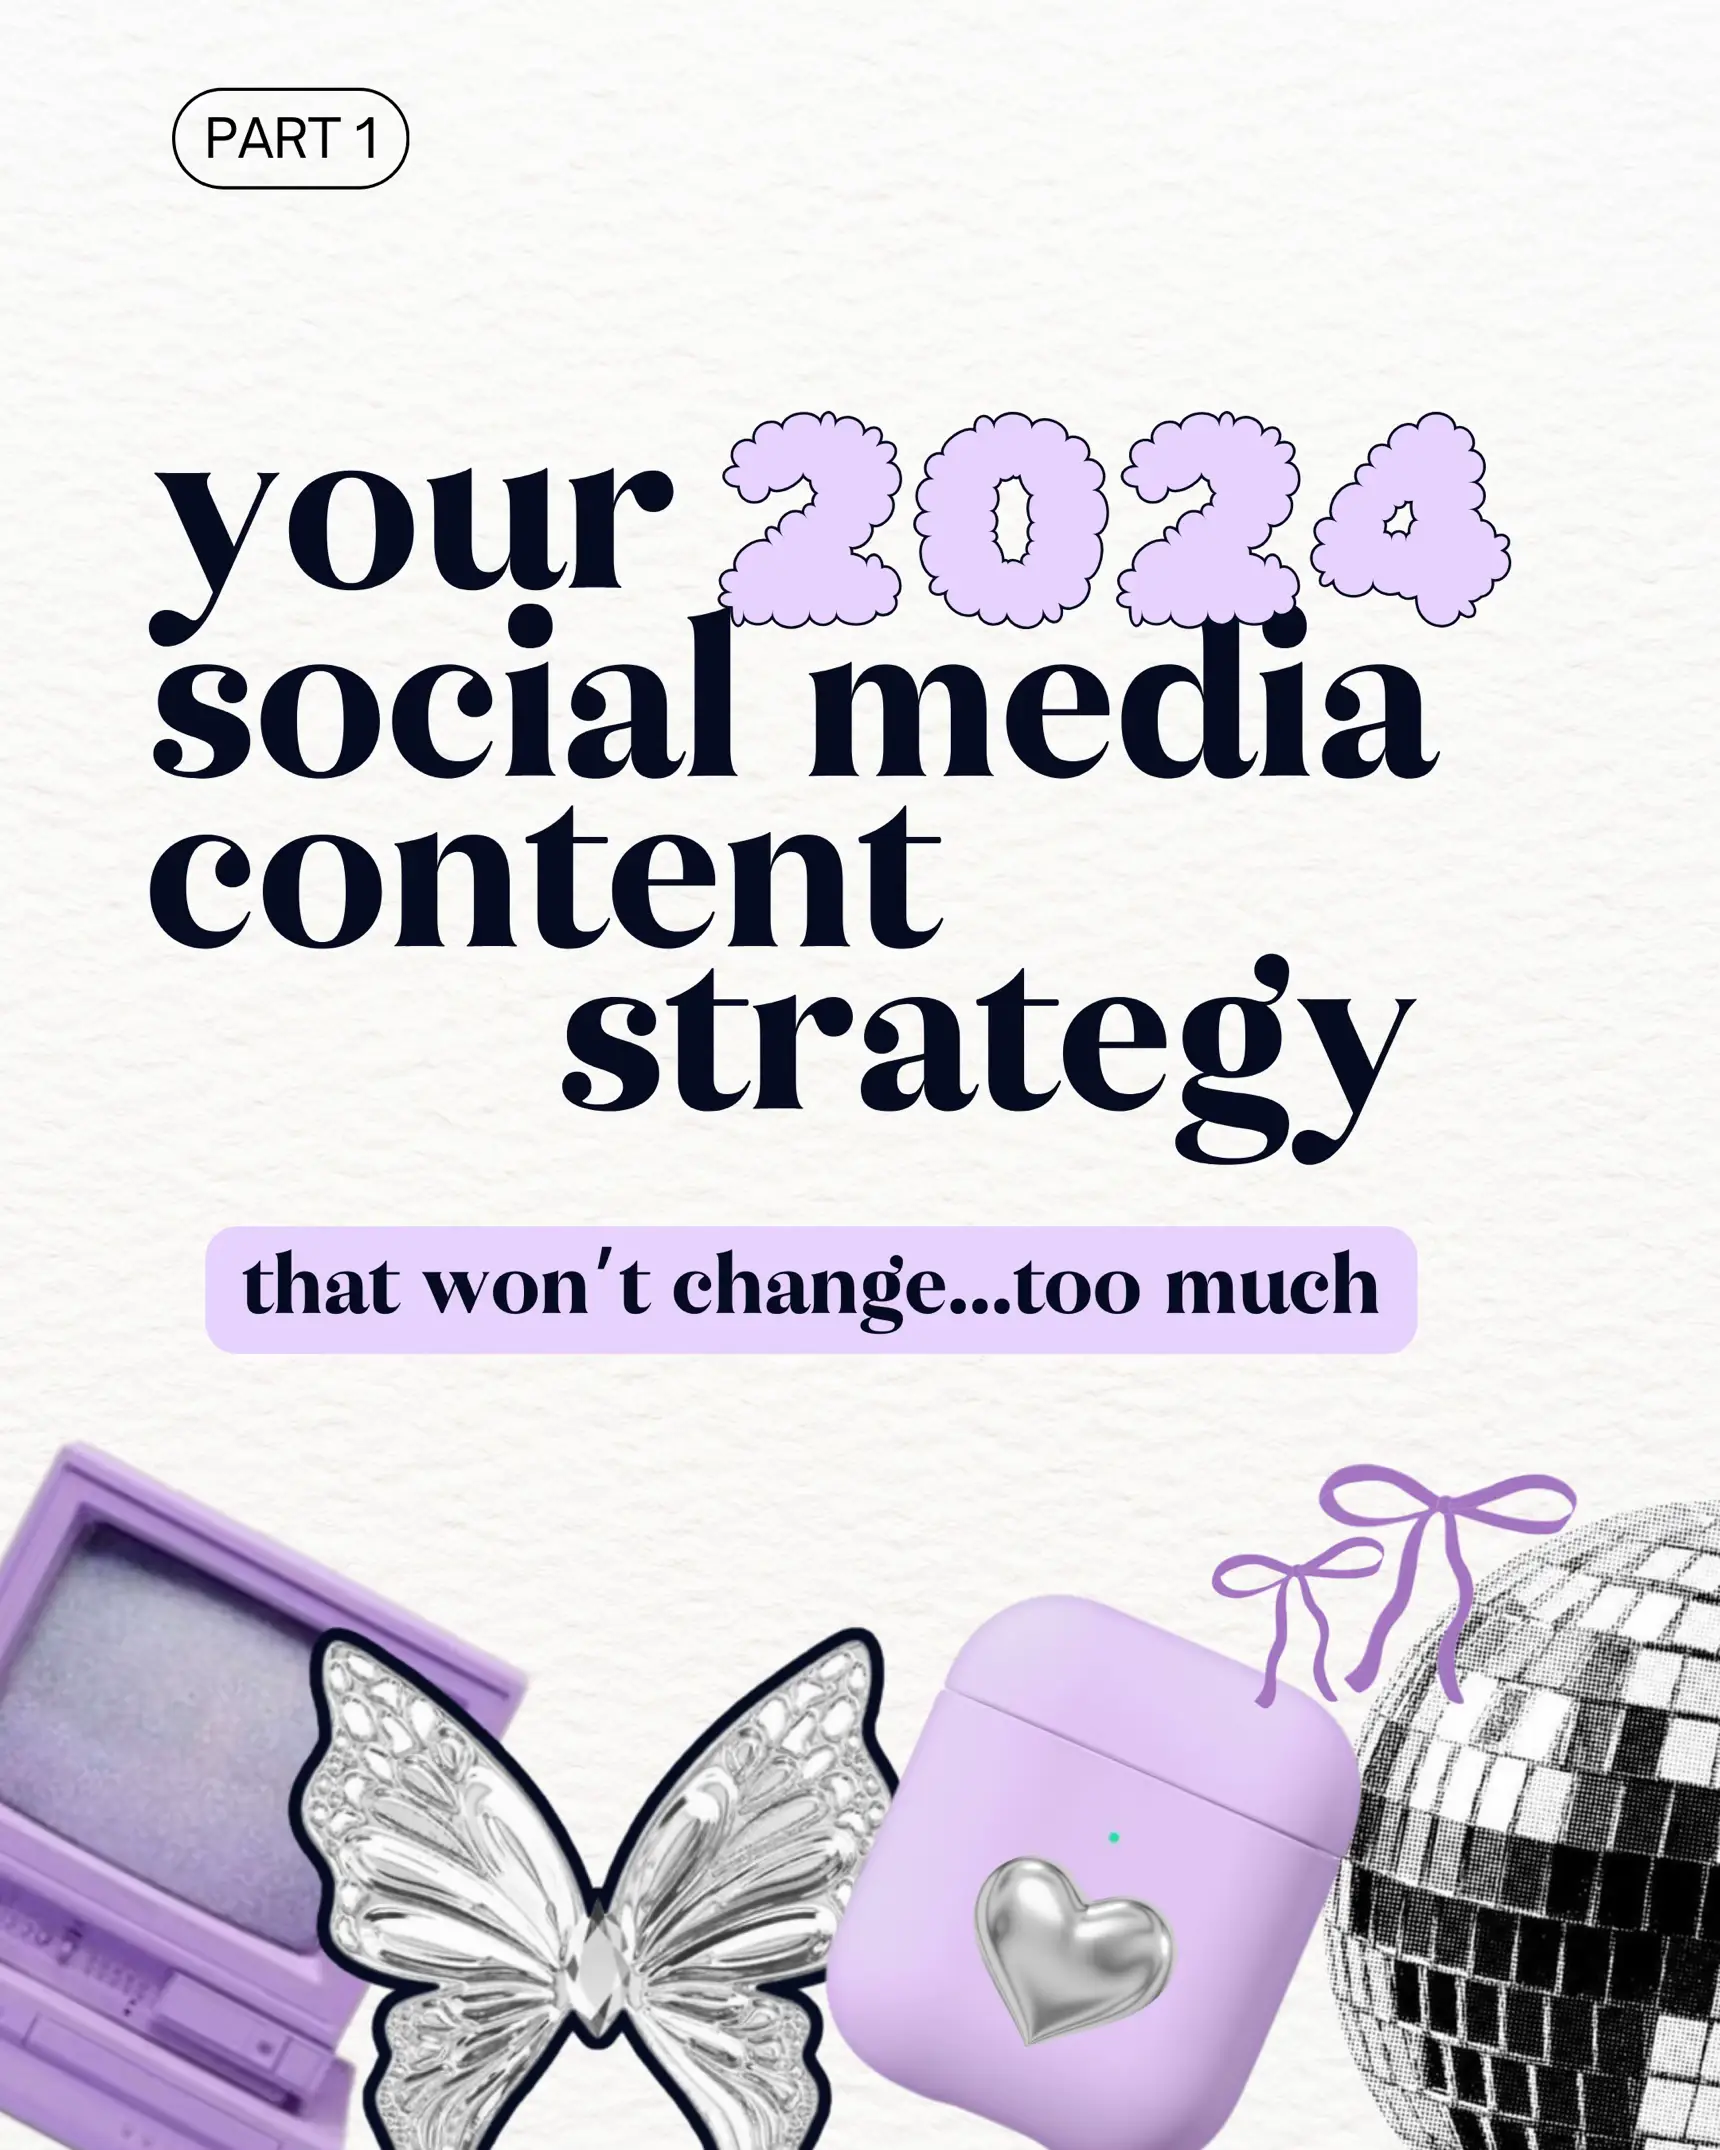  A collage of images and text that says "Your Content Strategy".